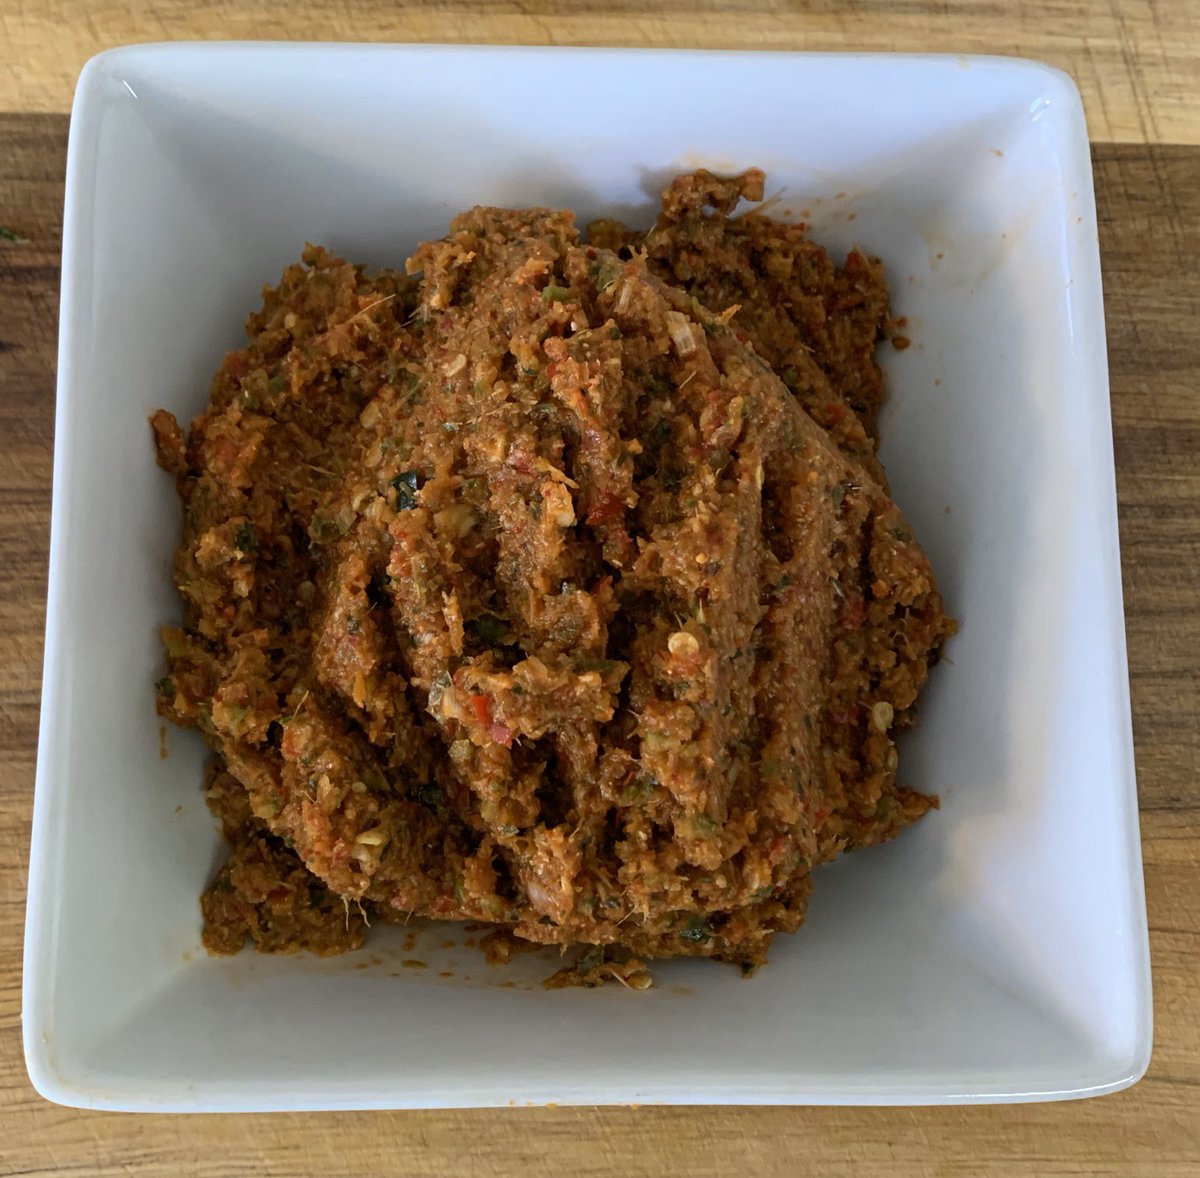 Starting with a Red Curry paste that is a base for some Thai dishes. I used this recipe with some substitutes: